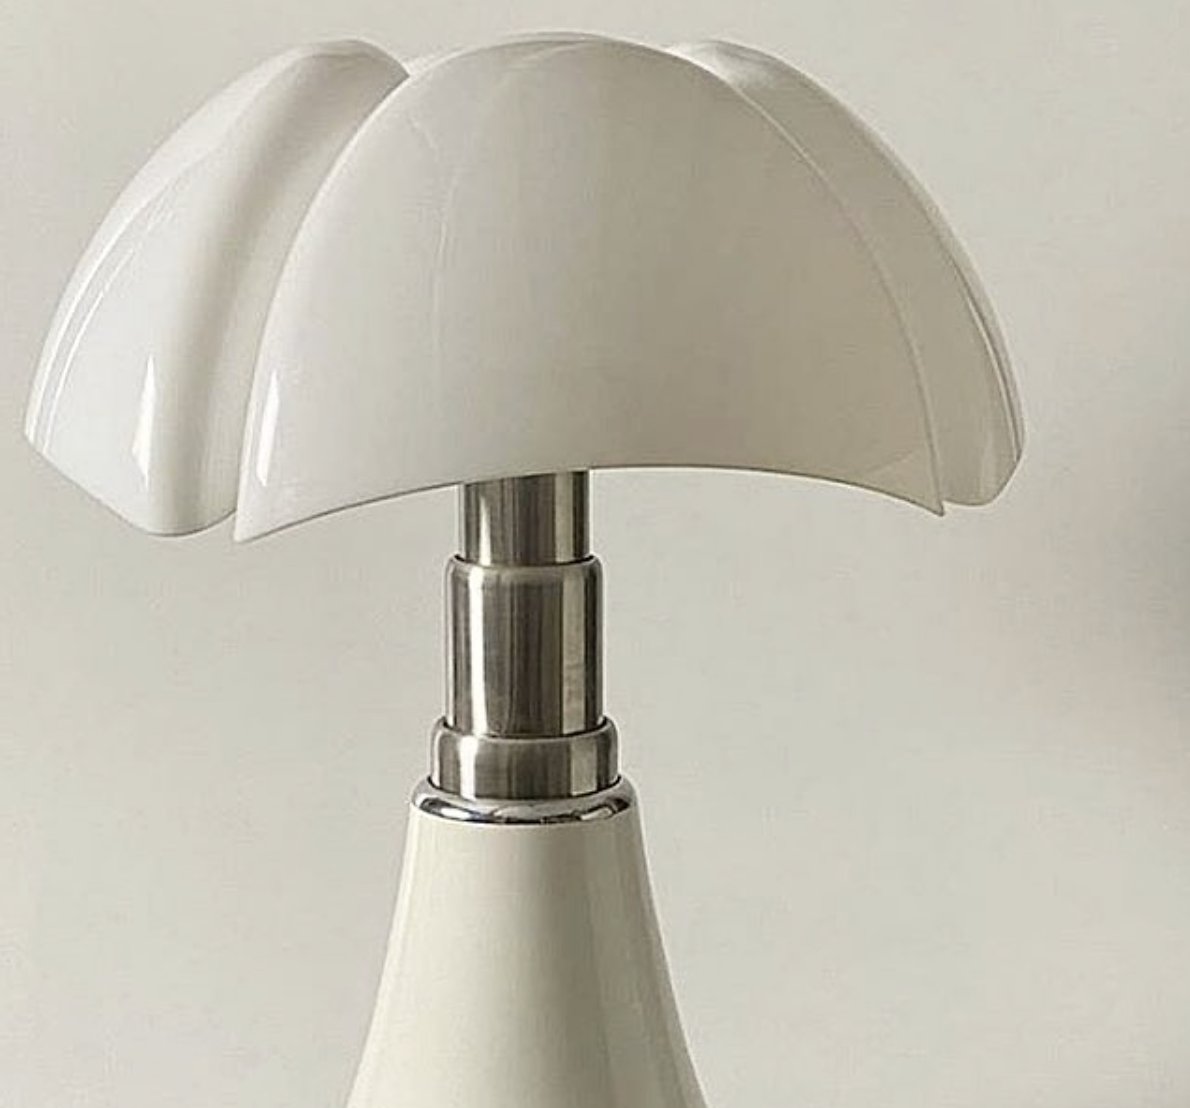 Cue the "Pipistrello"Now one of her more famous pieces, this oversized table lamp uses the amorphous shapes of art nouveau in its lampshade modernized with its material (plastic), and paired back with the traditional base